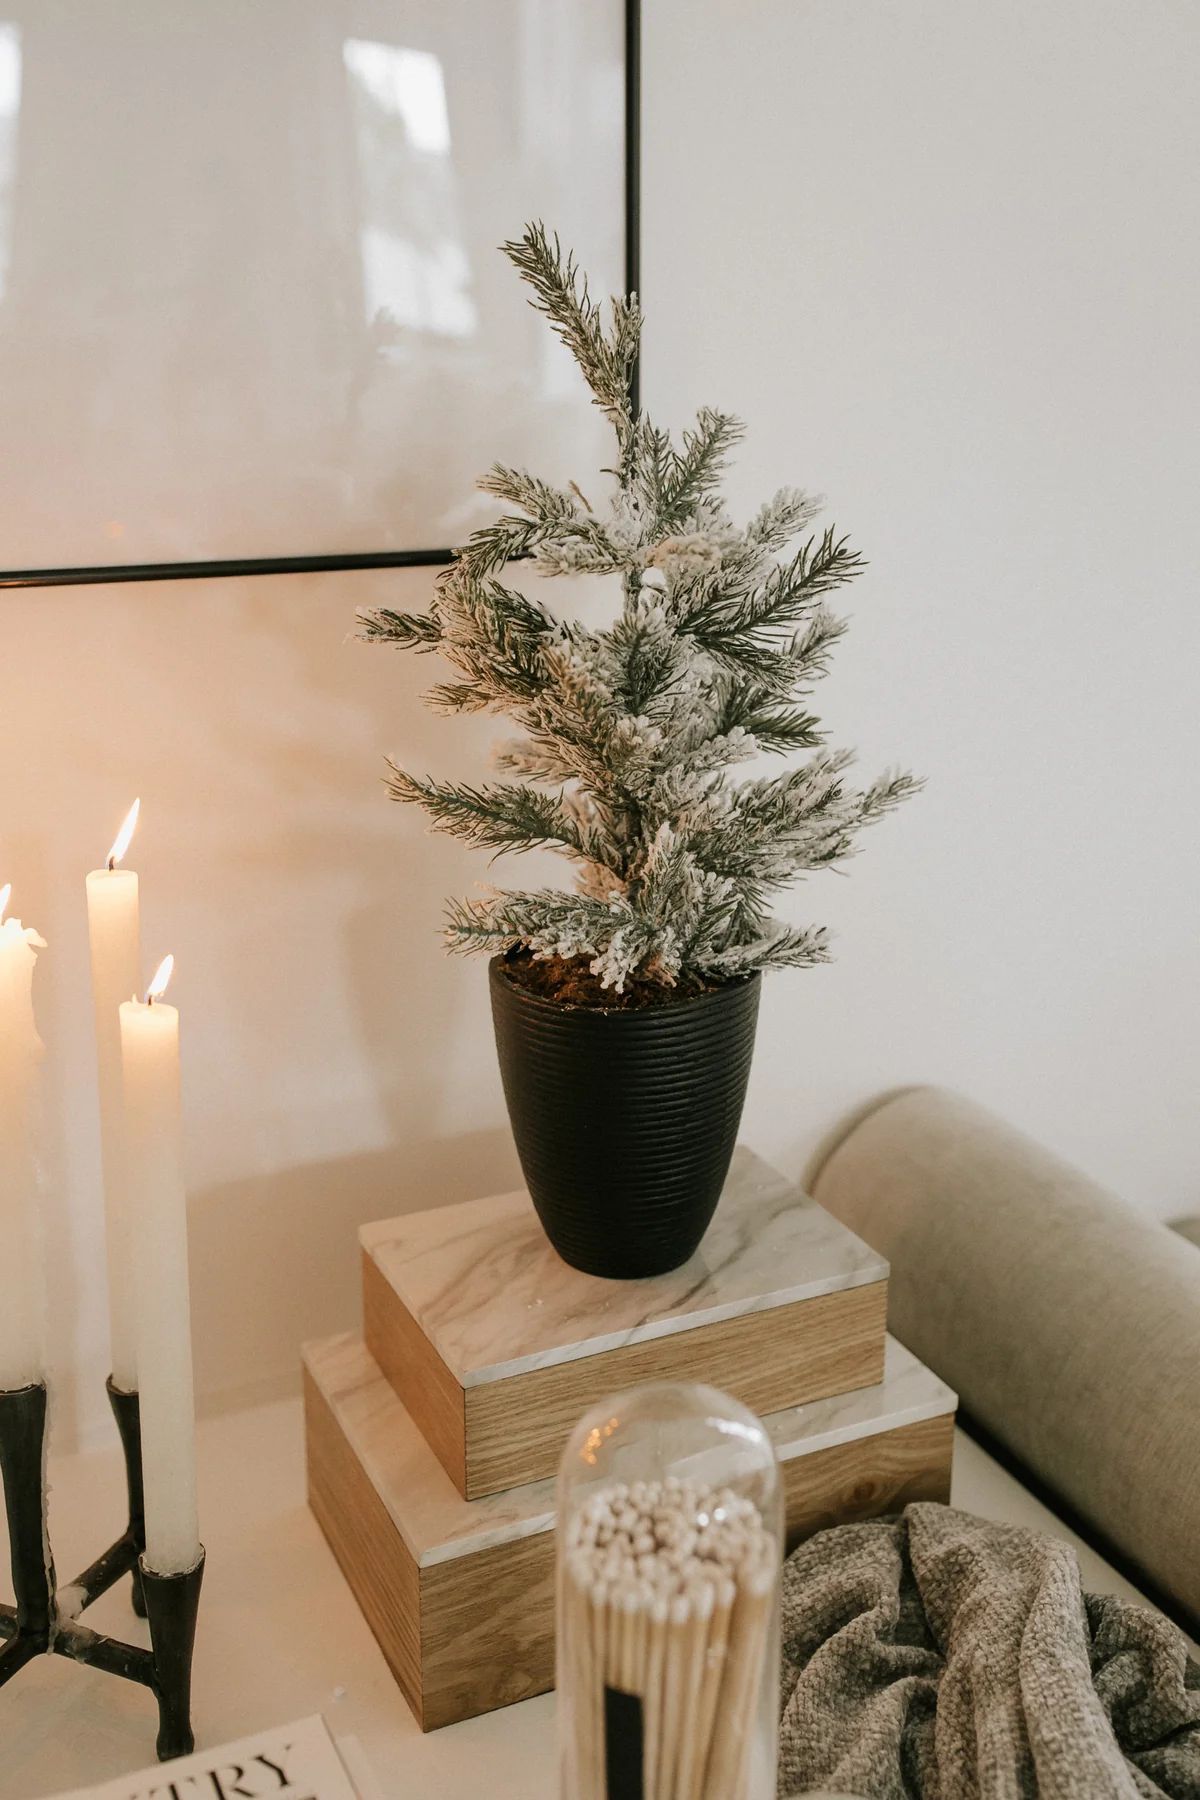 Huntley Potted Pine | THELIFESTYLEDCO